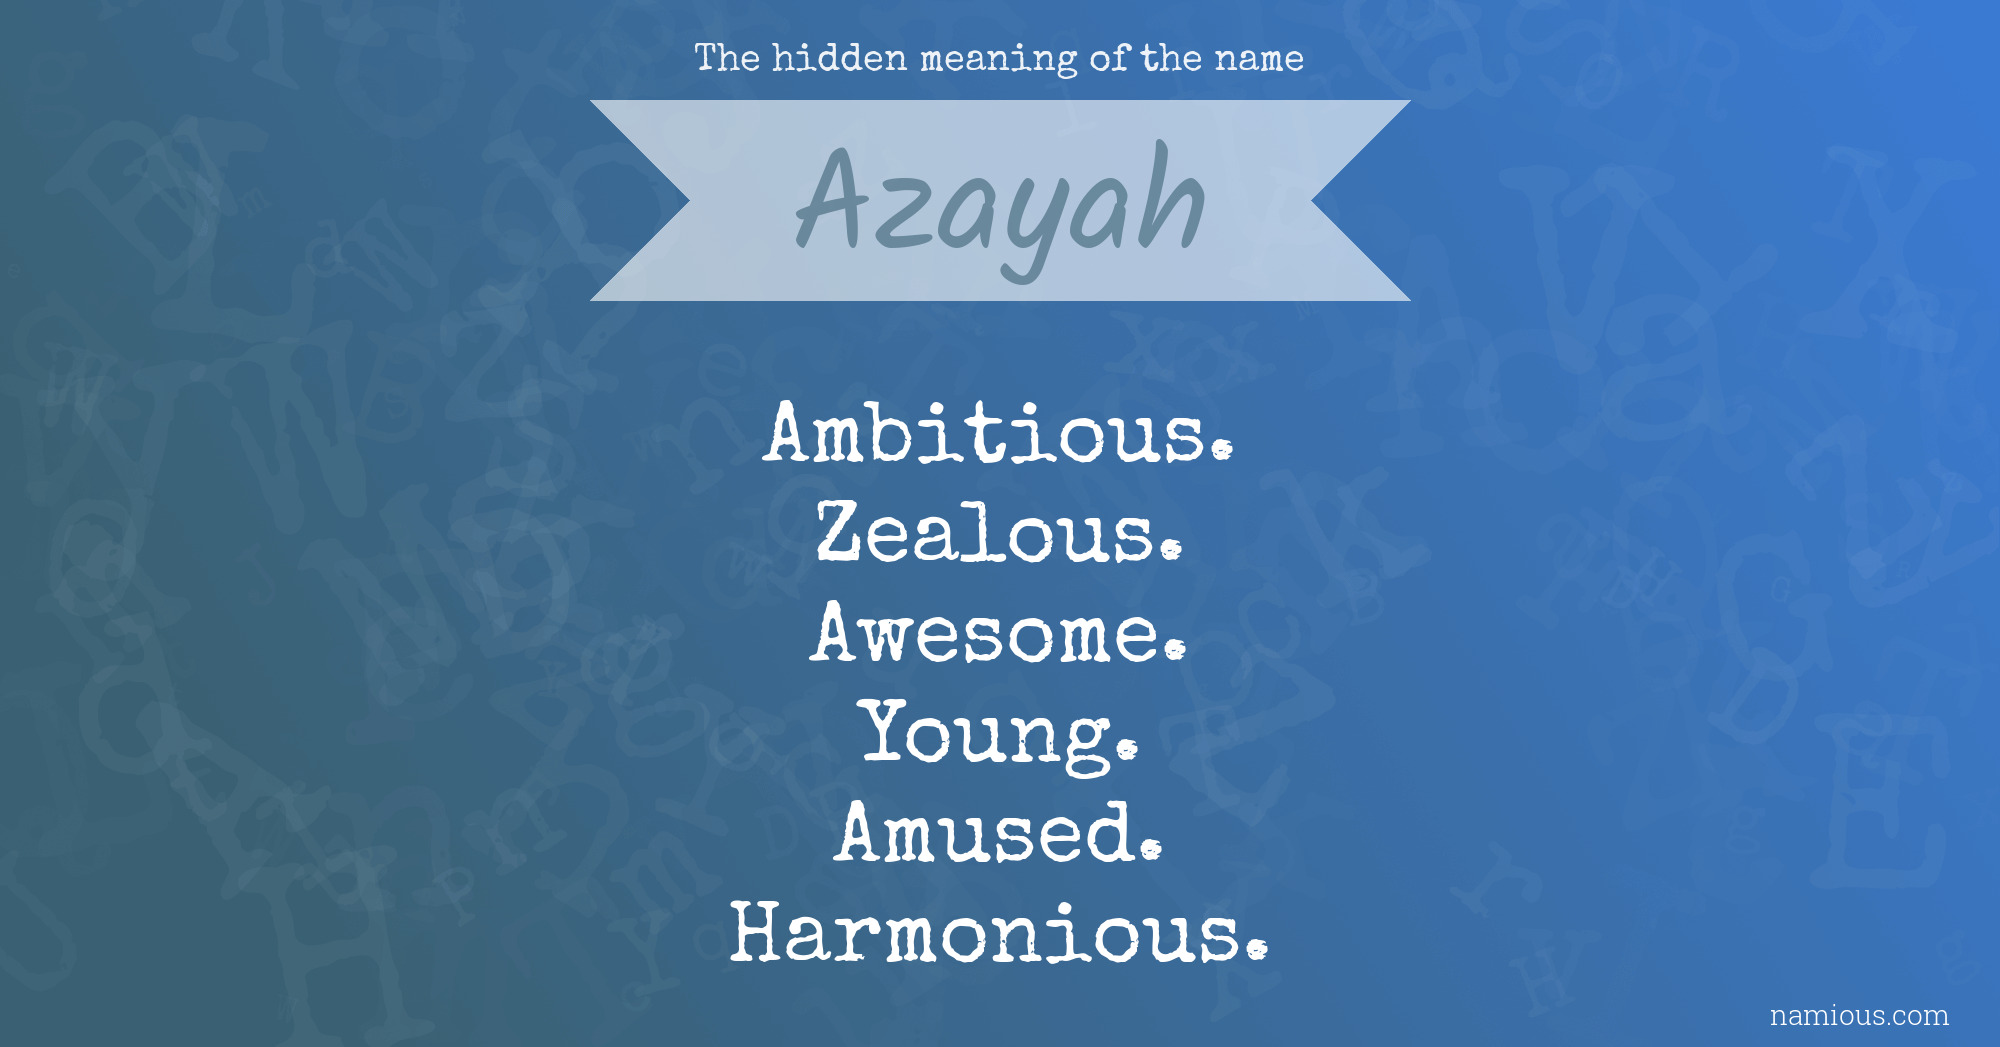 The hidden meaning of the name Azayah